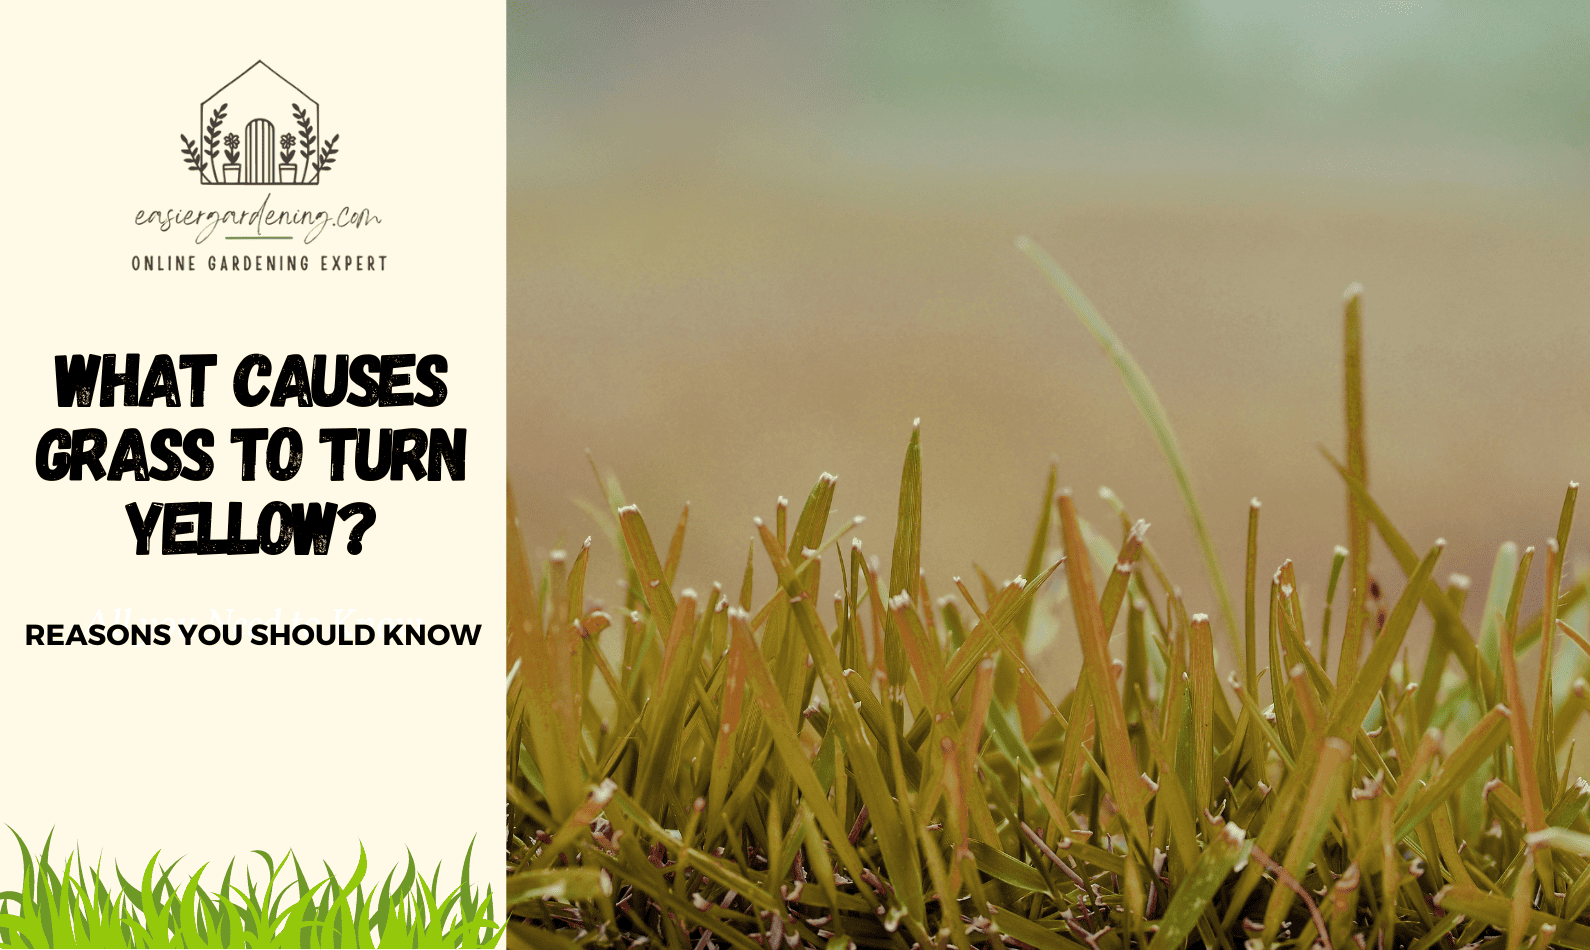 What Causes Grass to Turn Yellow?